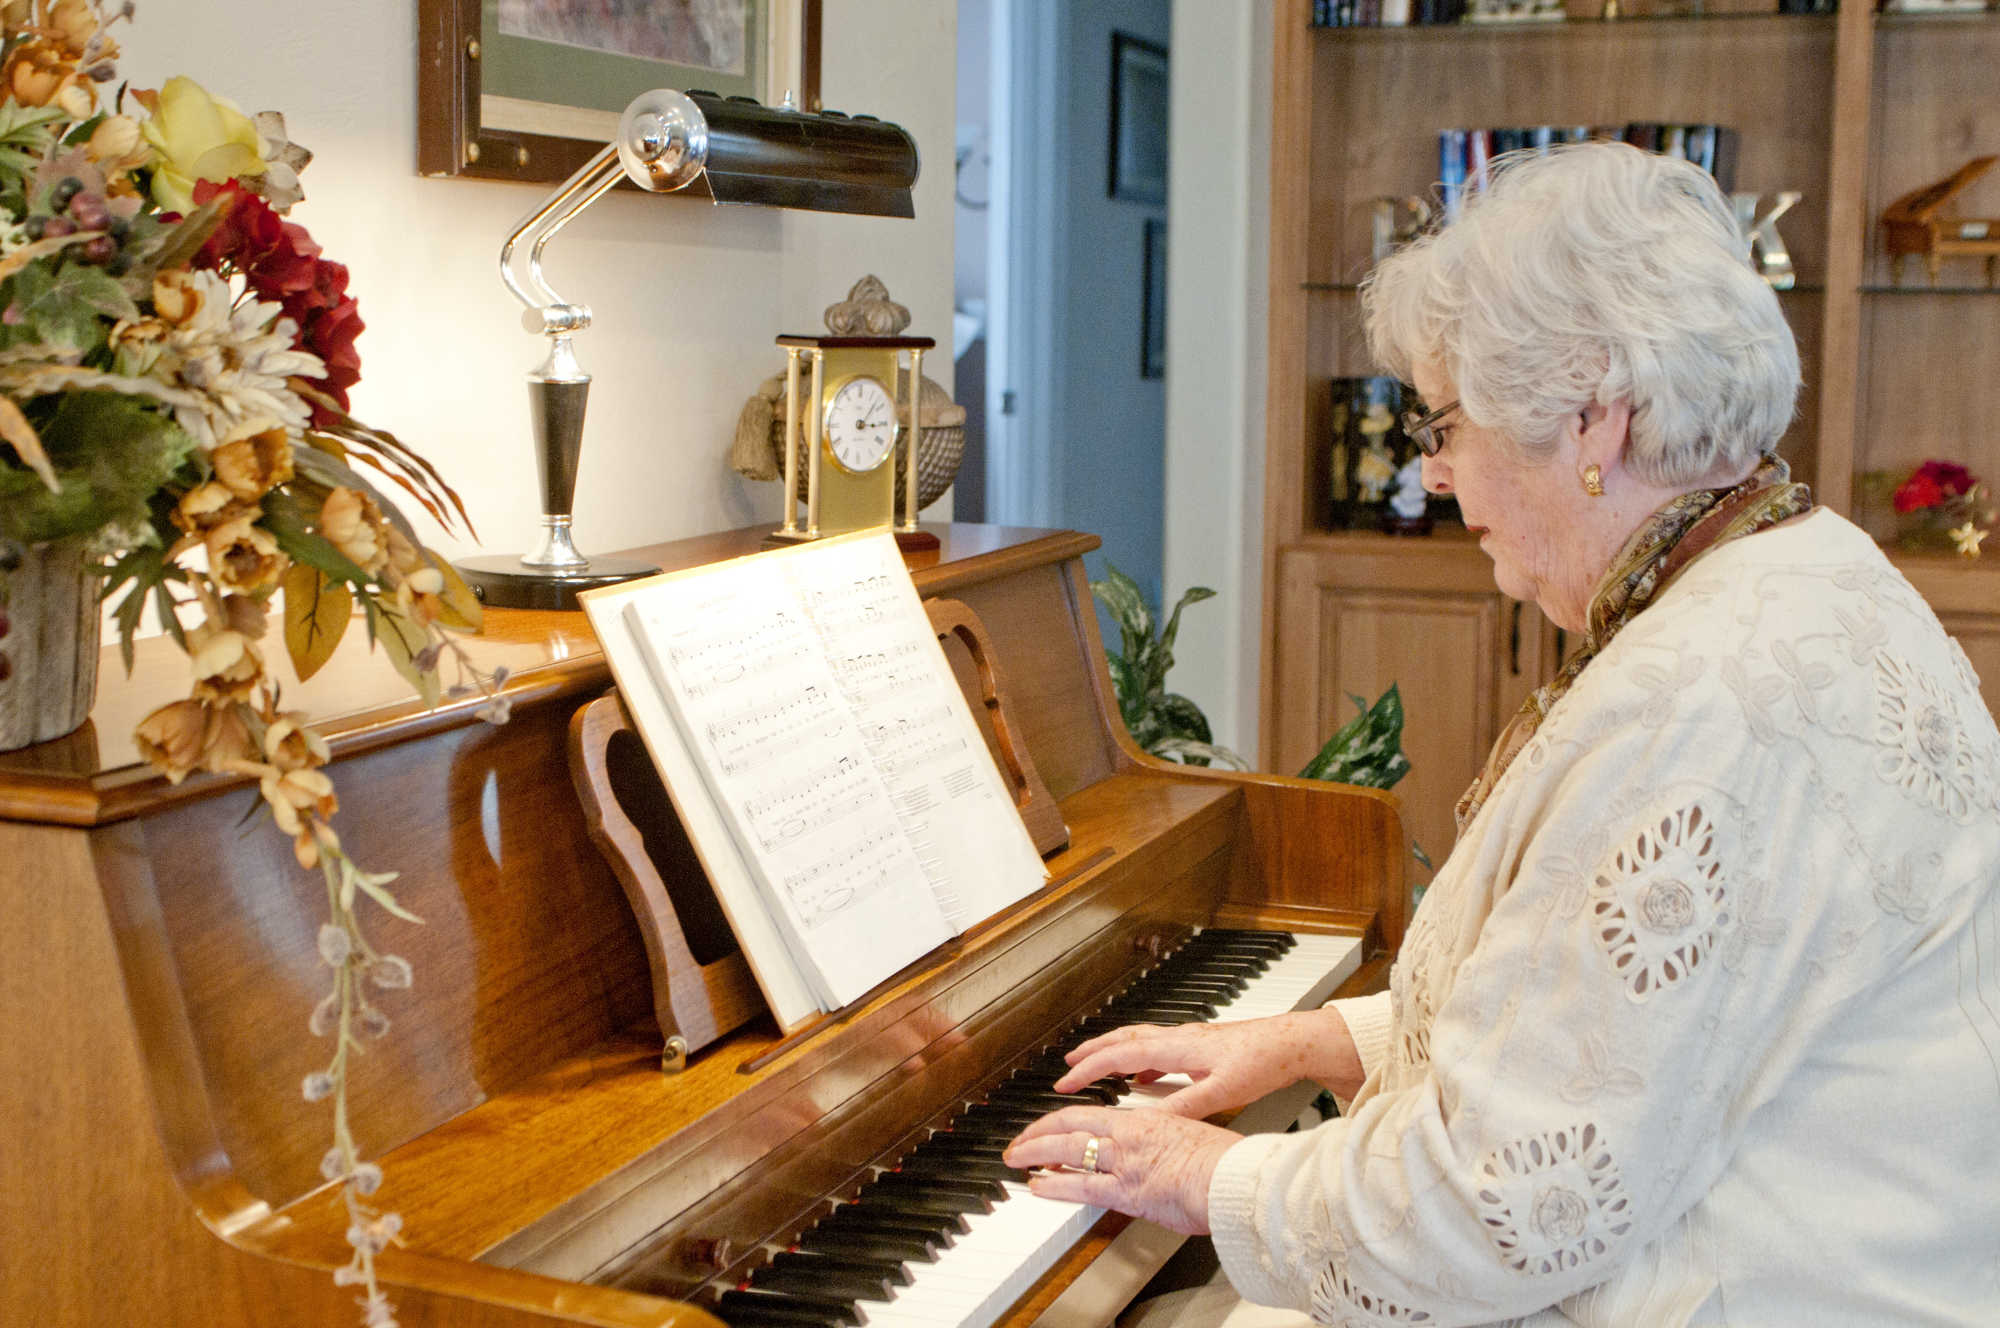 An older woman plays the piano